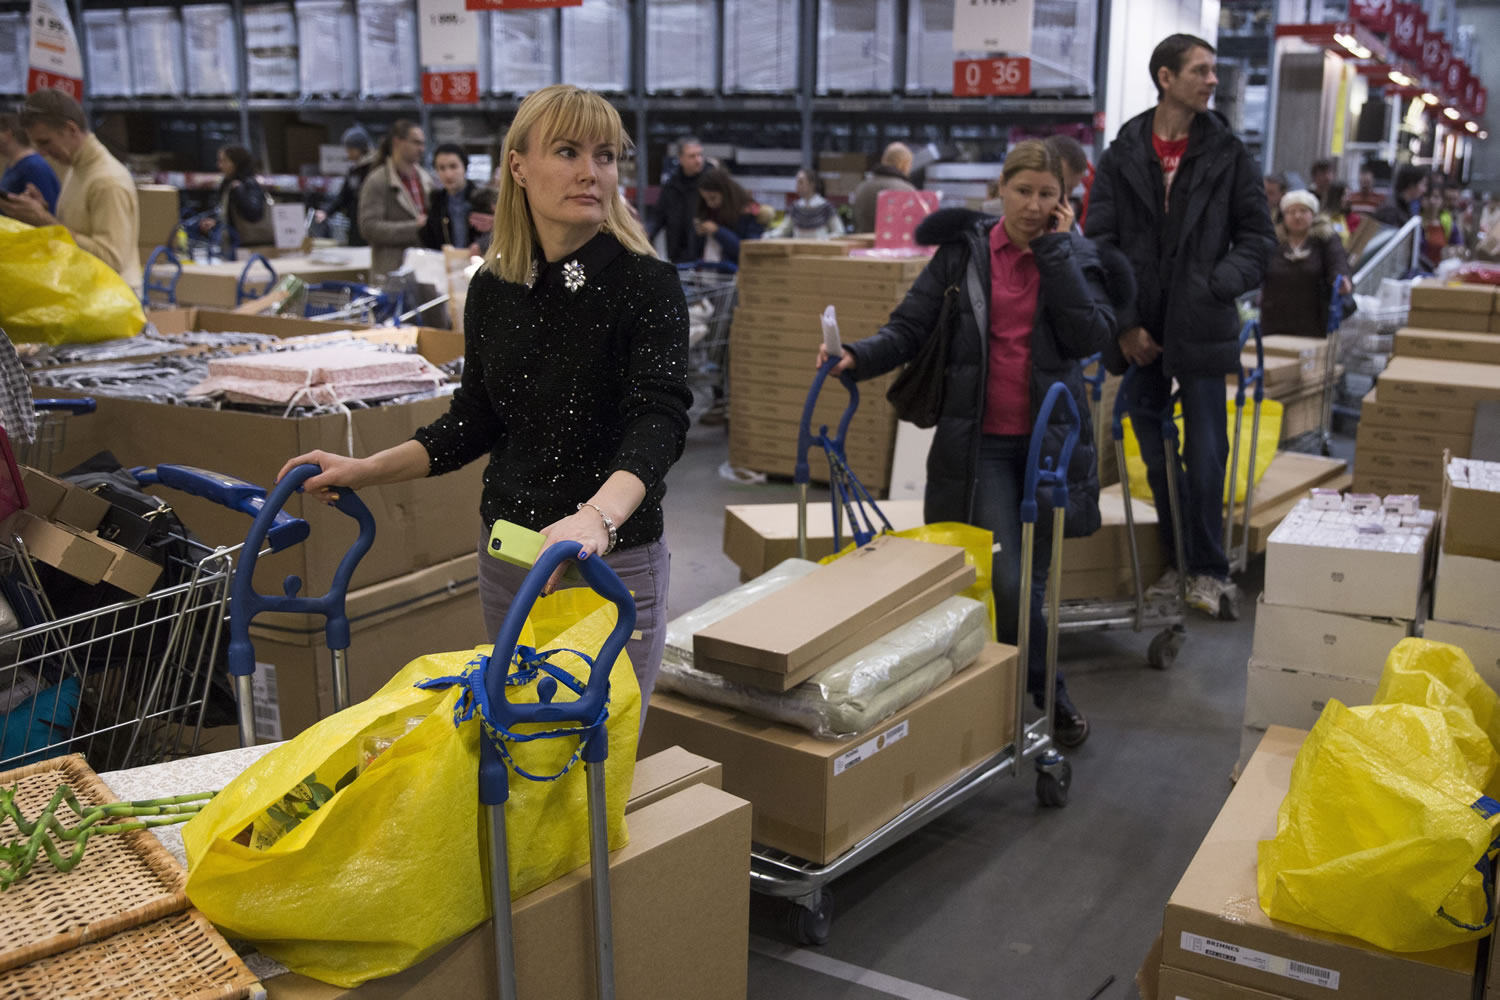 People wait in a checkout line Wednesday at the Ikea store on the outskirts of Moscow.